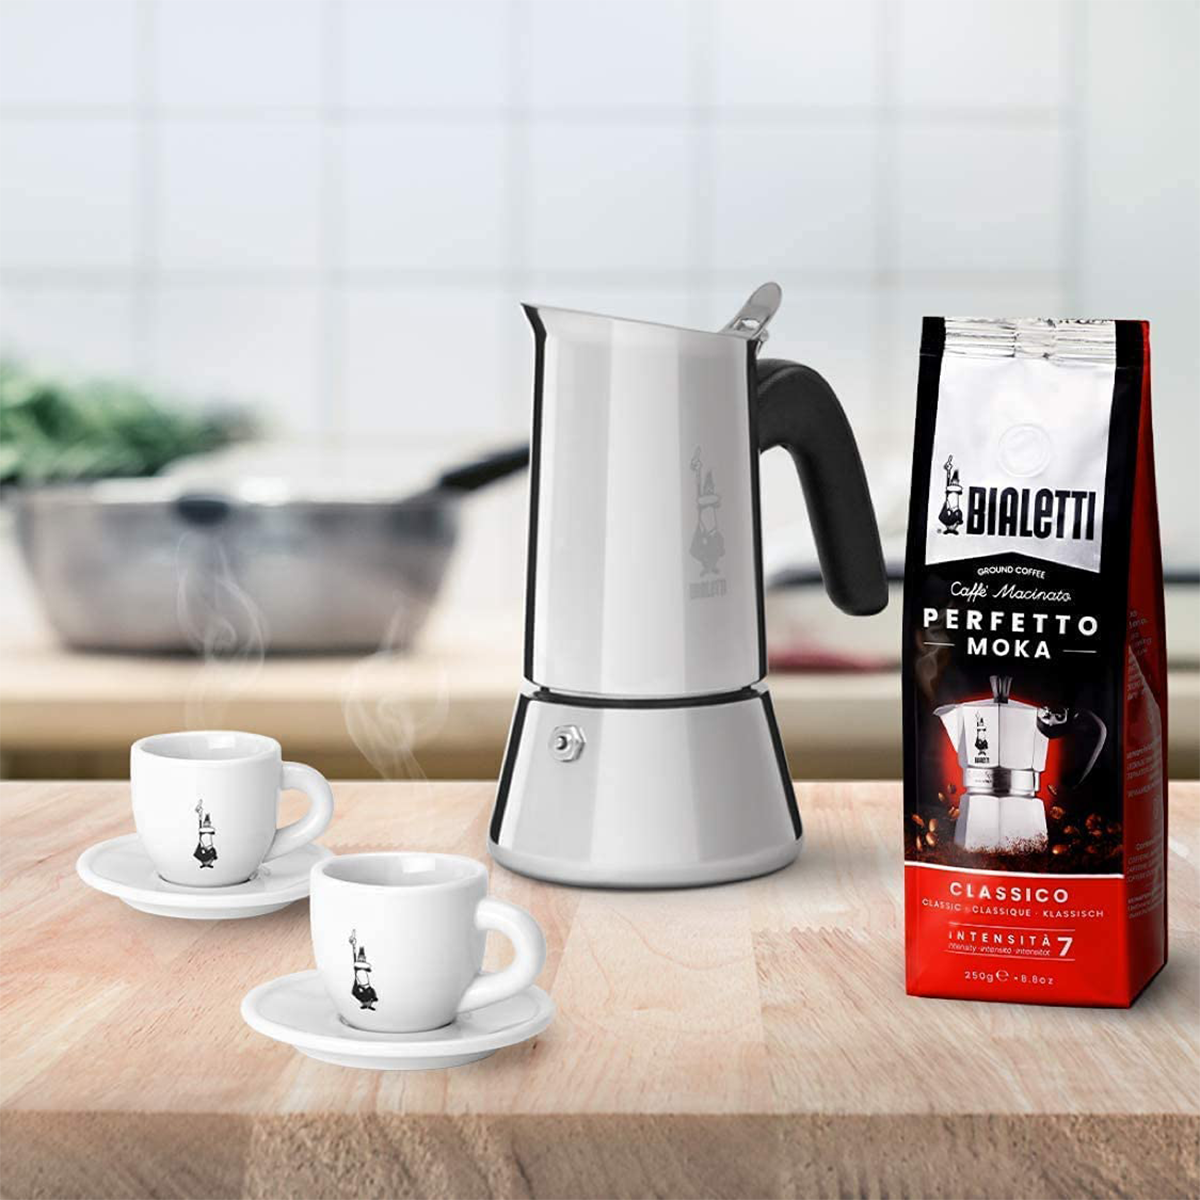 https://www.redberus.shop/wp-content/uploads/1692/43/looking-for-a-bialetti-venus-induction-r-stainless-steel-stovetop-coffee-maker-6-cup-silver-bialetti-to-purchase-be-quick_3.png